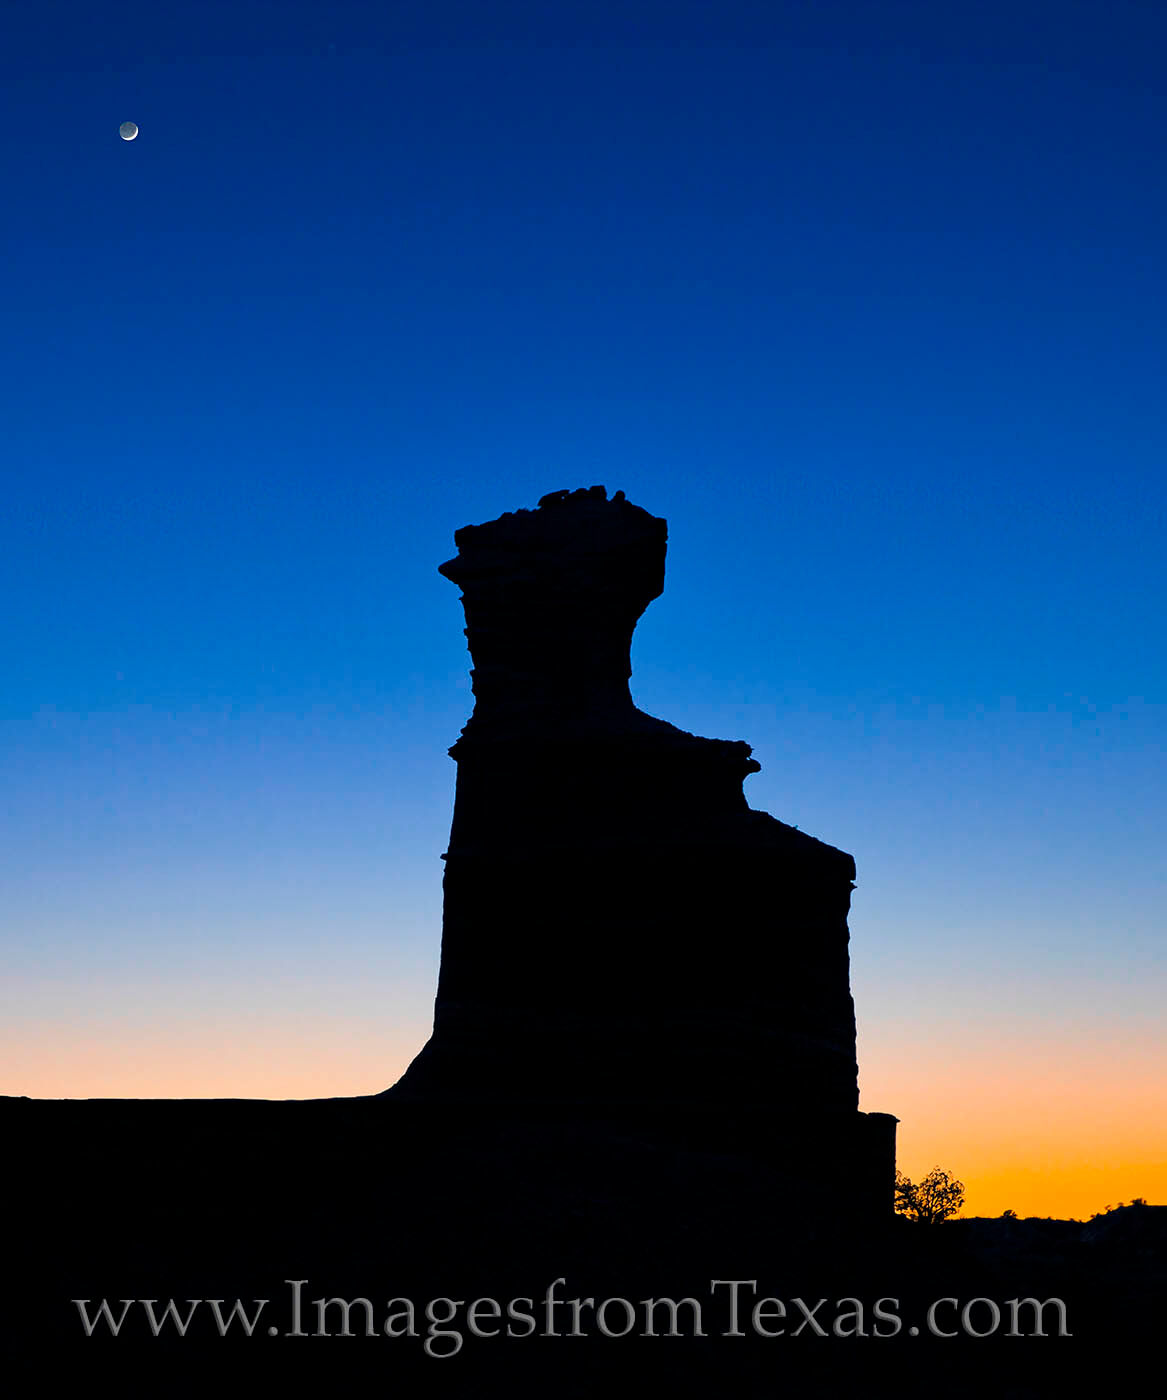 A crescent moon hangs over the Lighthouse in Palo Duro Canyon on a beautiful evening as light quickly fades.